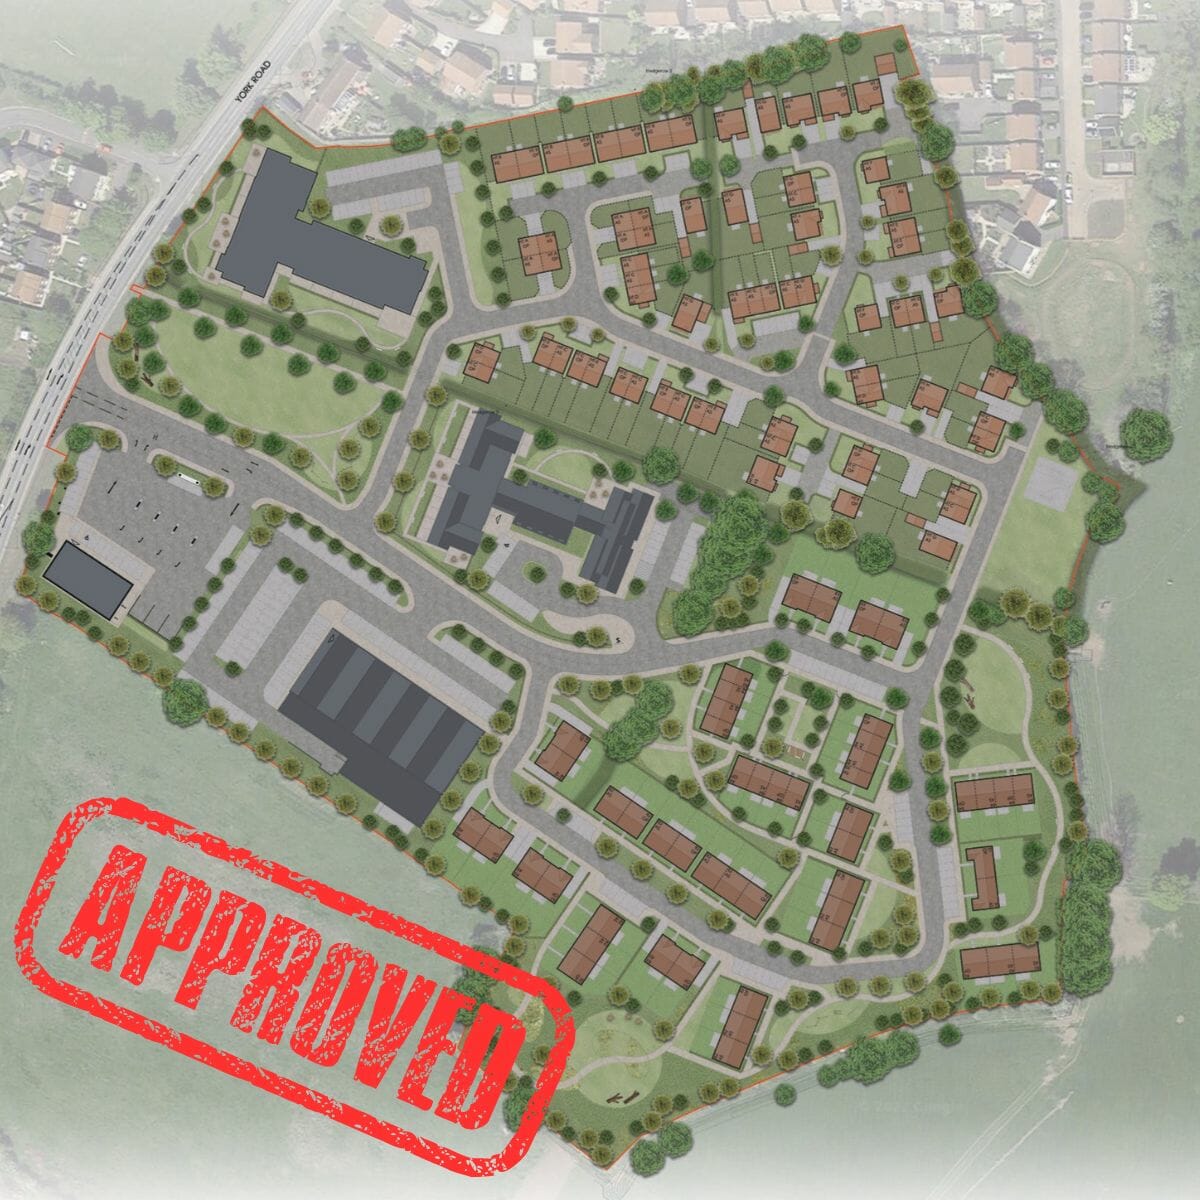 Unanimous Approval of a Major Mixed Use Development on the Outskirts of Easingwold